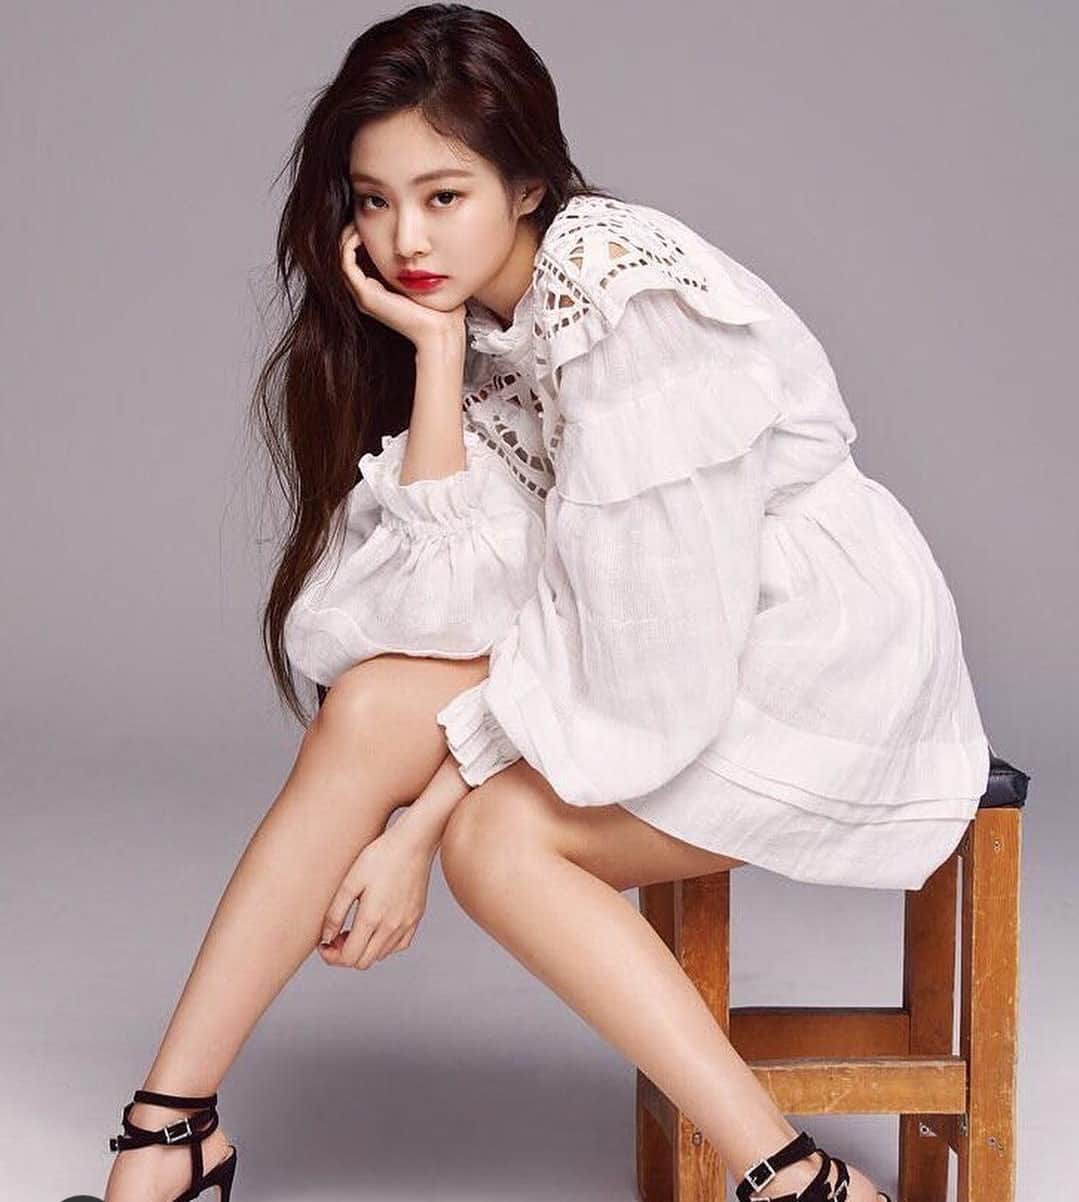 Kim Jennie Wiki - Celeb Face - Know Everything About Your Favorite Star